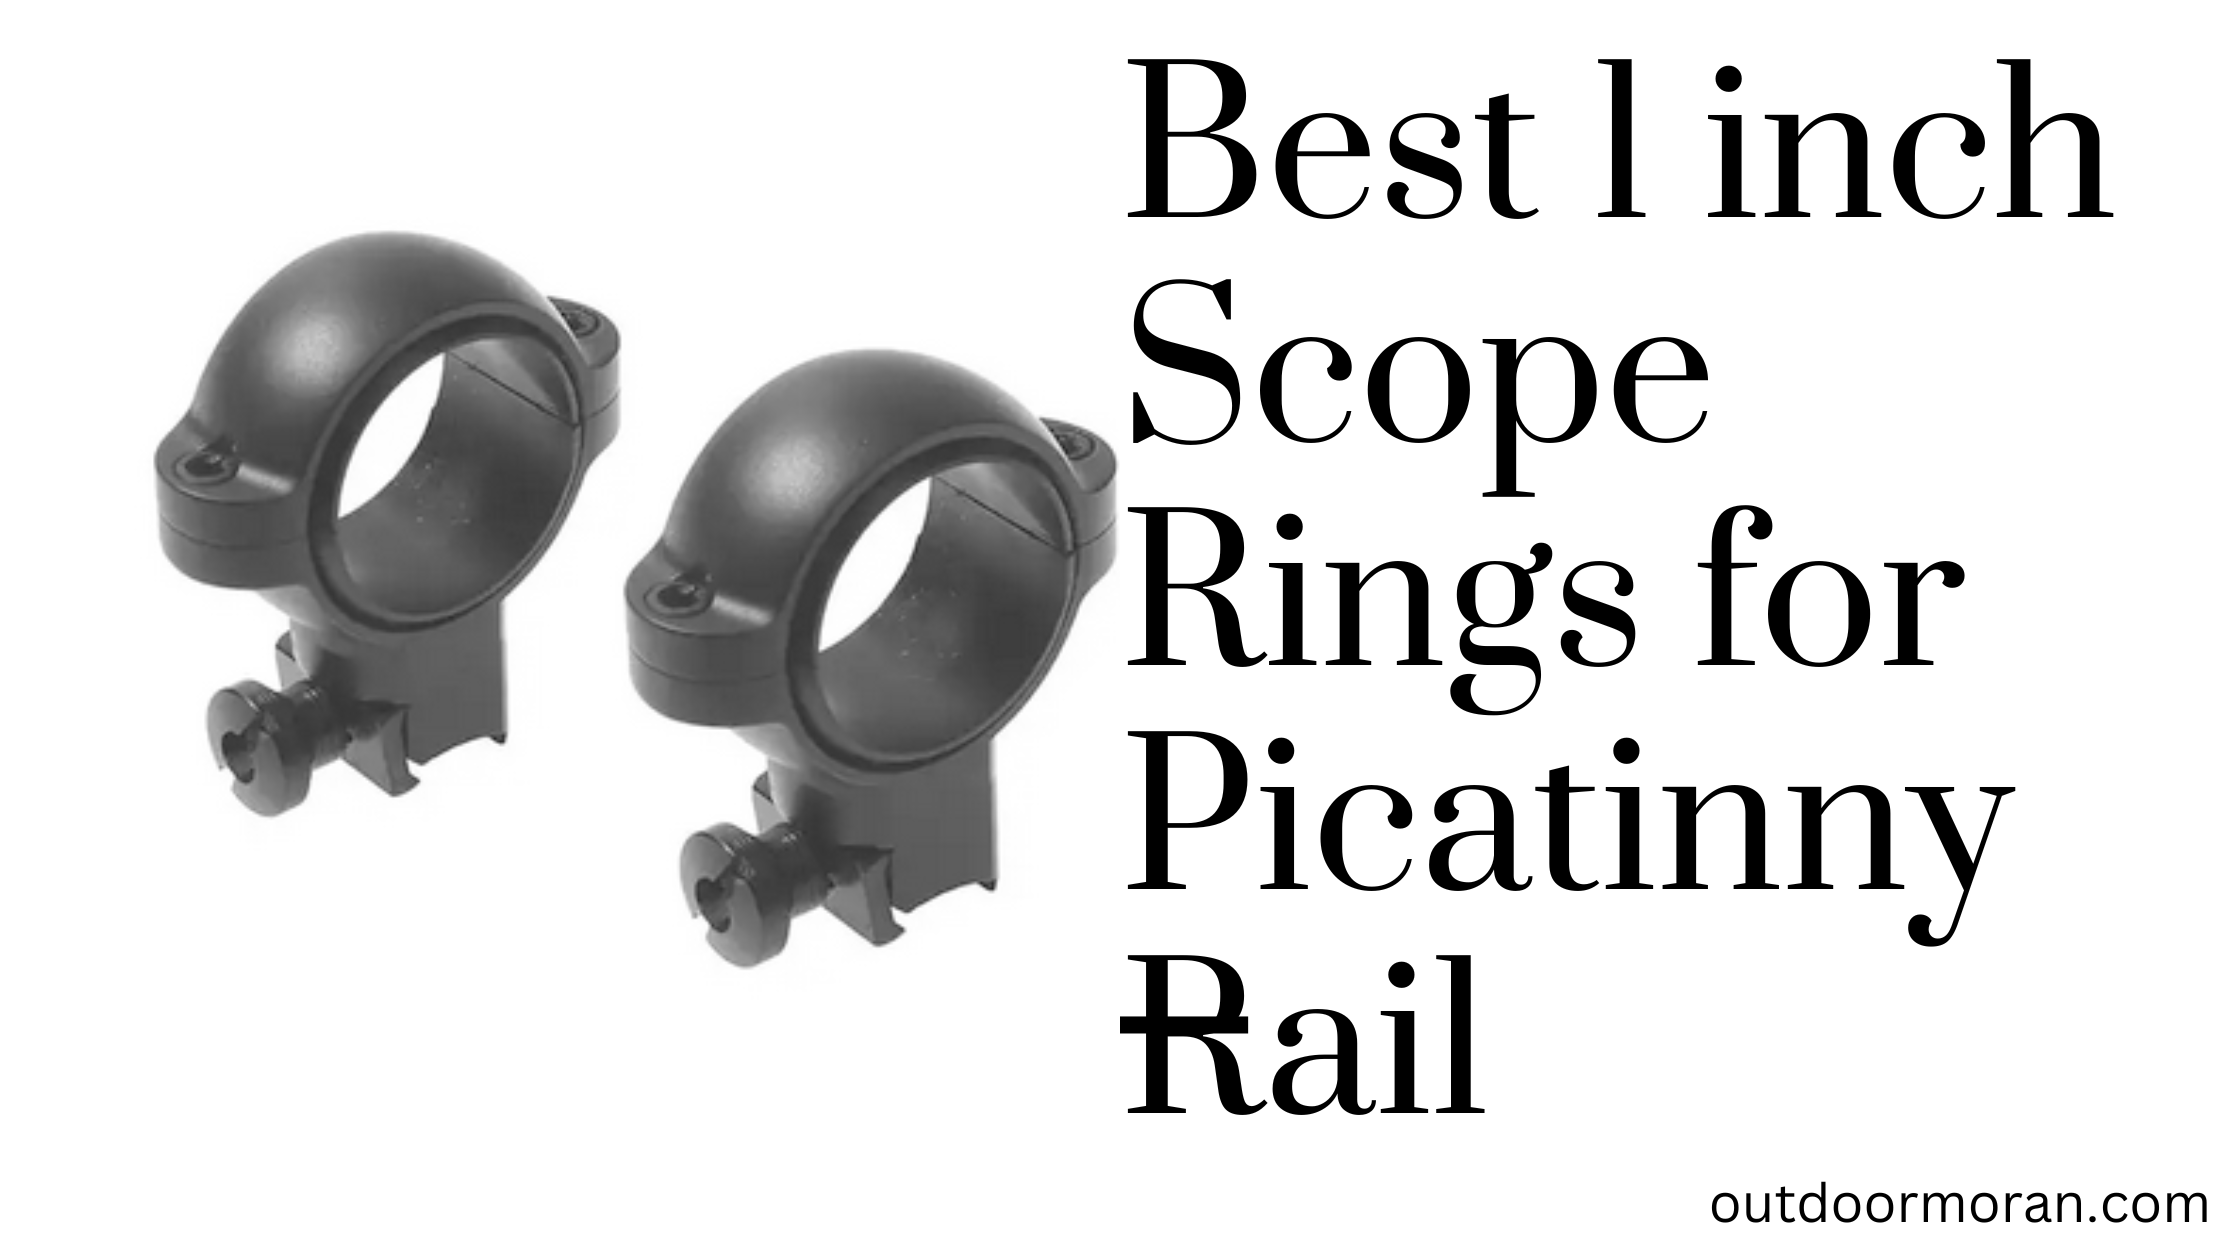 Best 1 inch Scope Rings for Picatinny Rail